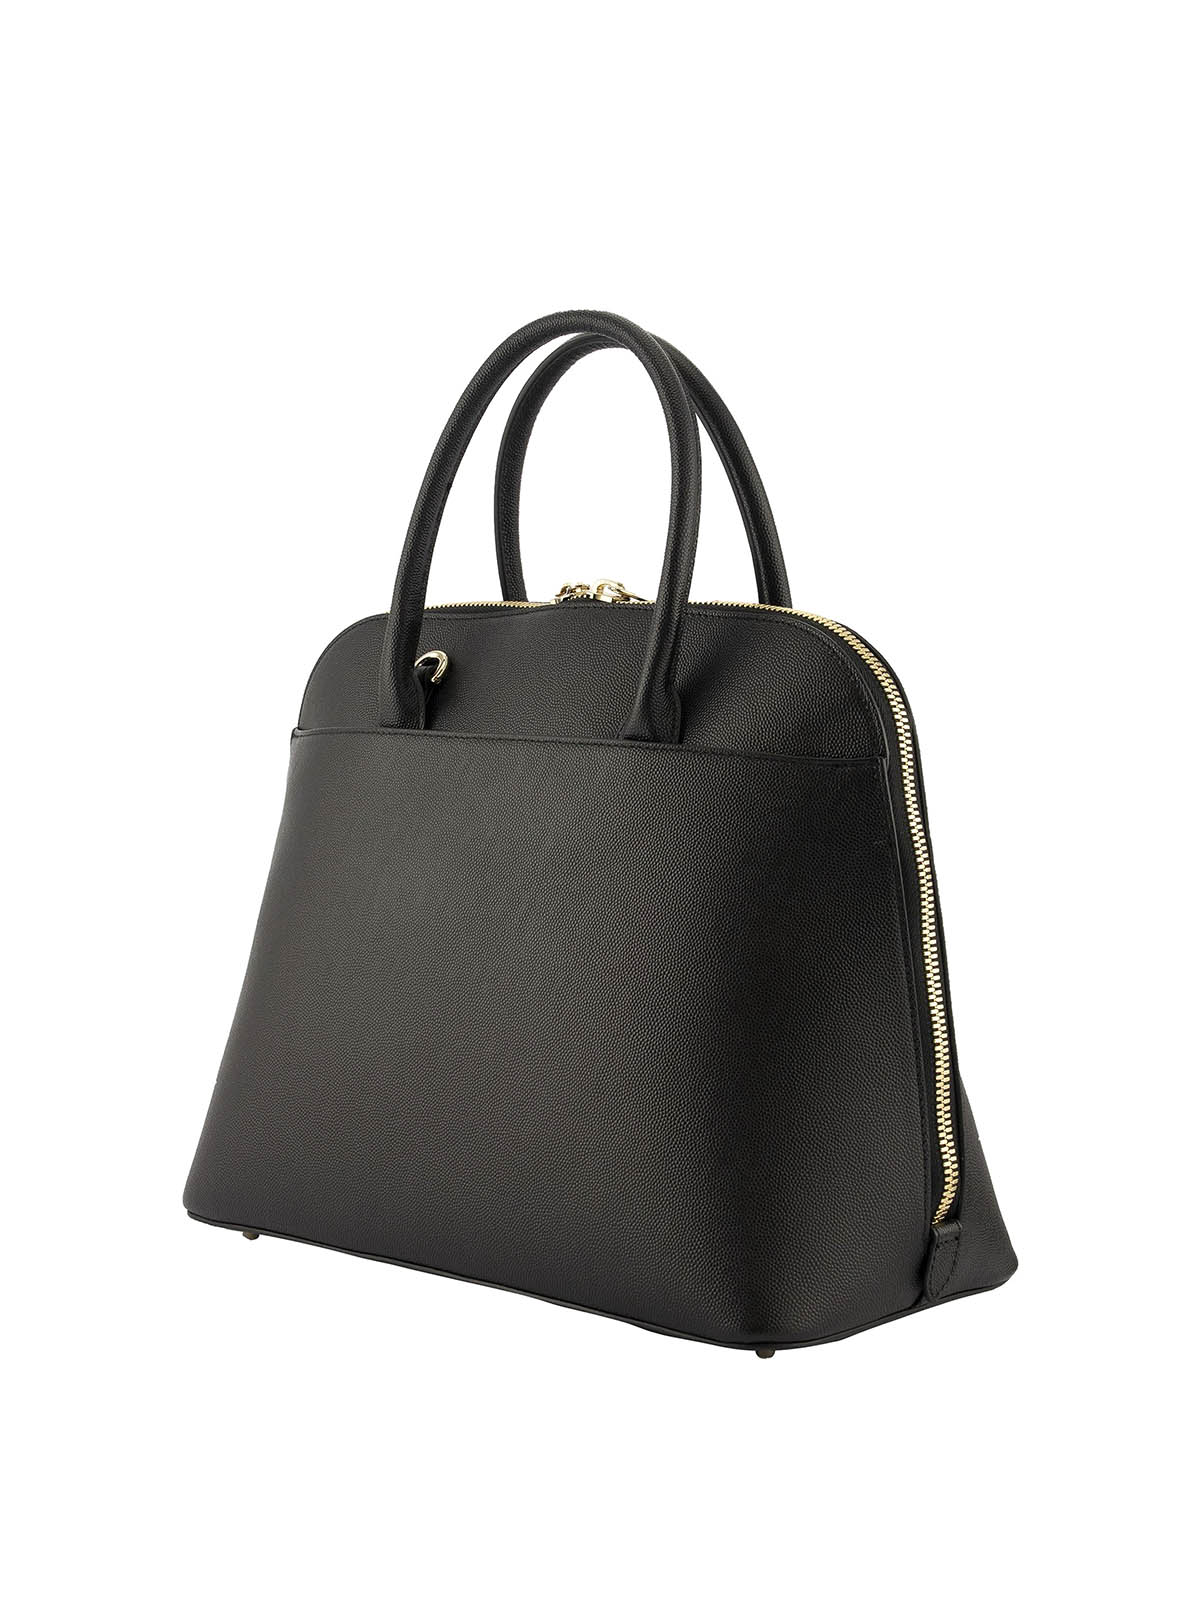 LOUIS VUITTON Tangier Tote Bag M40023｜Product Code：2100300795601｜BRAND OFF  Online Store